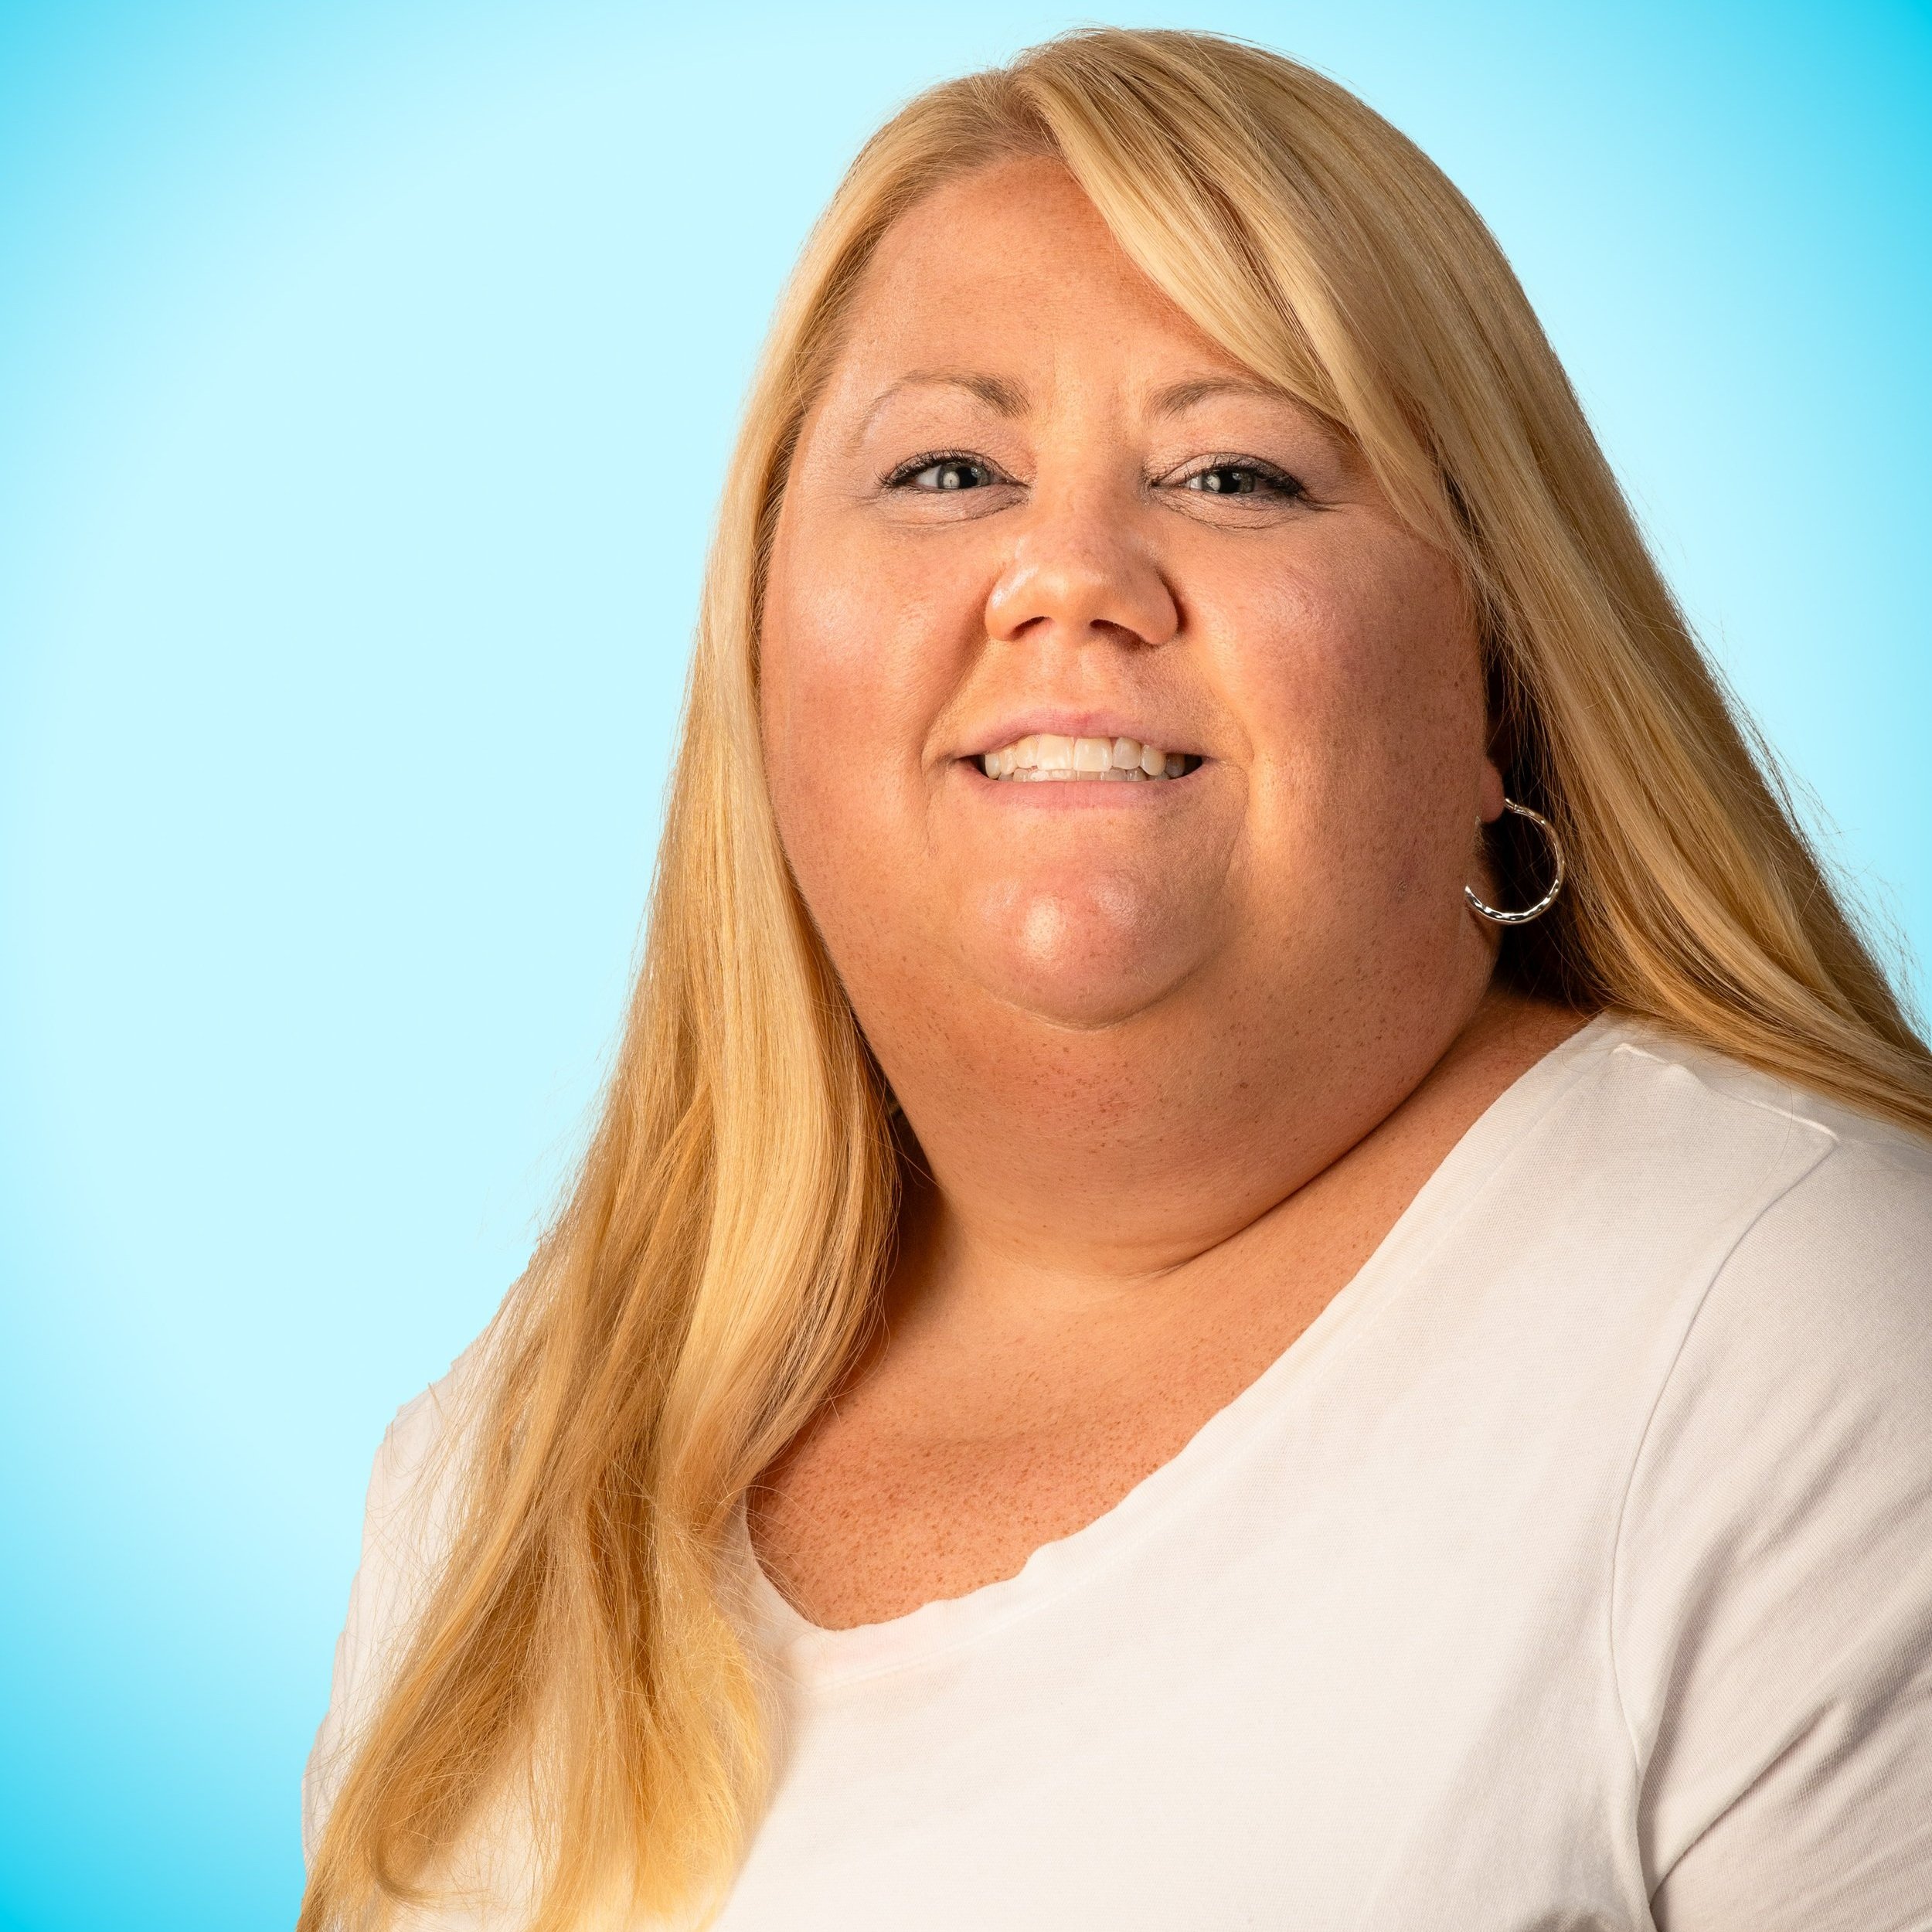   Jaime Morris,  LMSW, CHES     Supervisor of Case Management   she/her   Read More →  